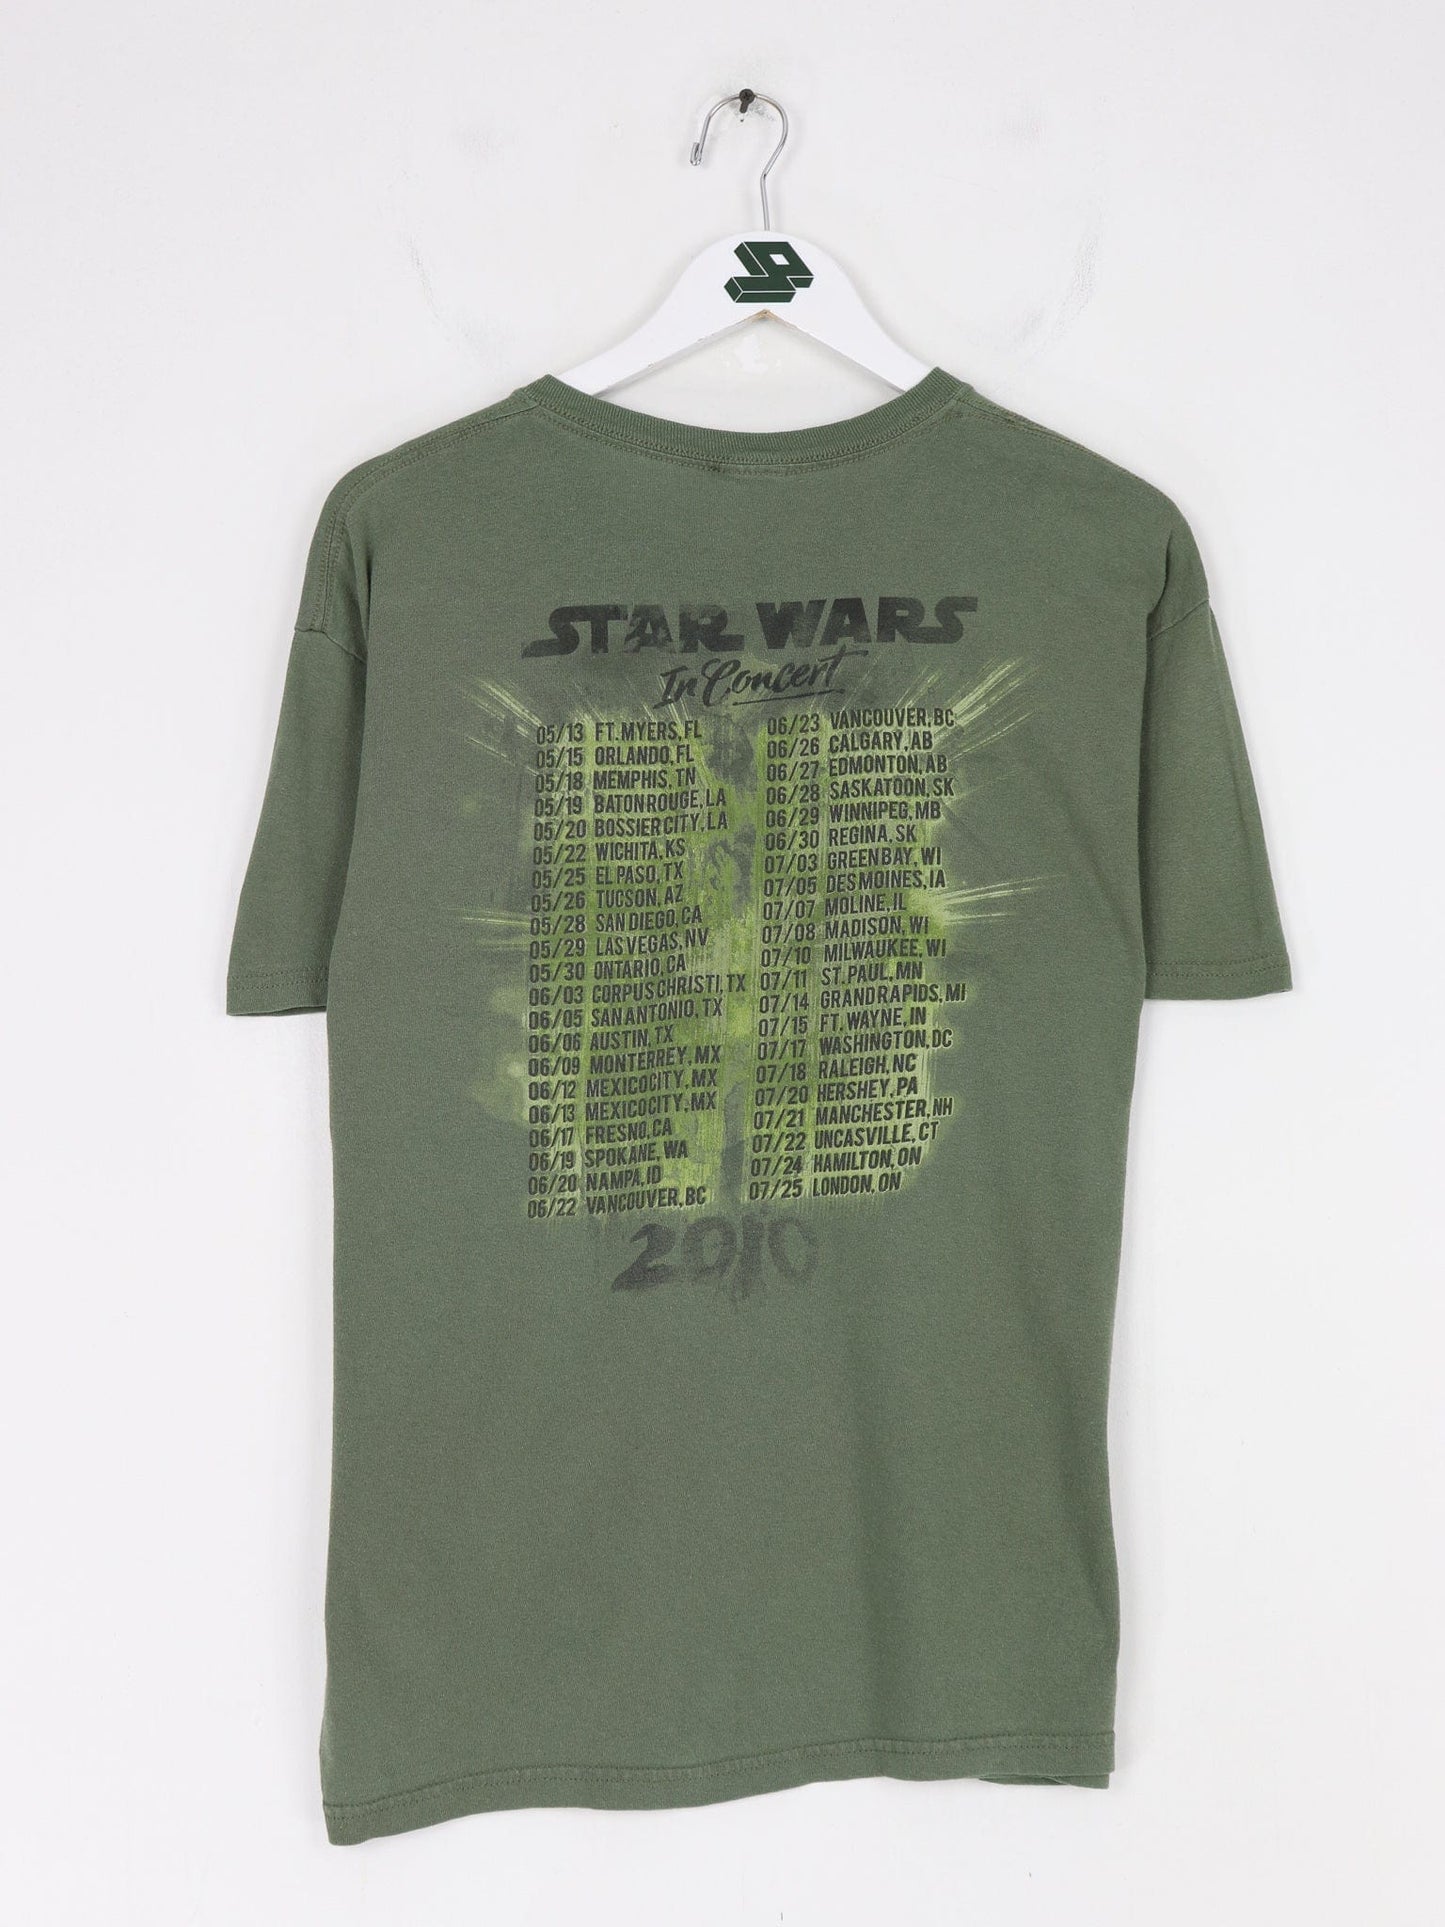 Star Wars T Shirts & Tank Tops Star Wars In Concert T Shirt Mens Medium Green 2010 Tour TV Show Movie Double Sided